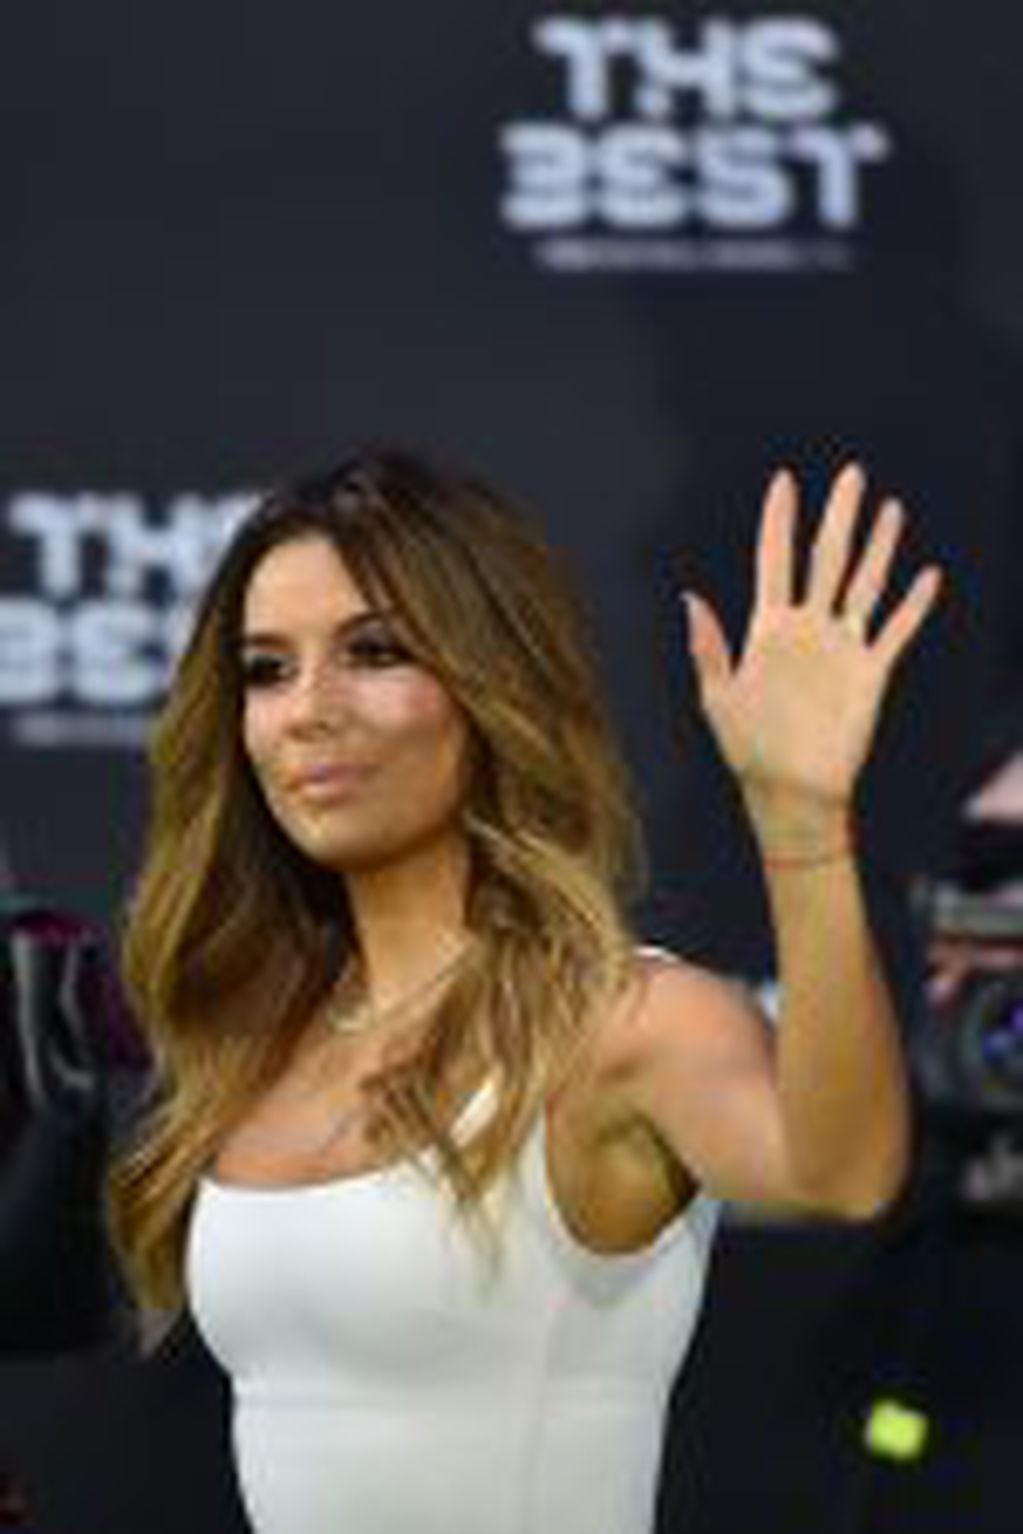 Co-host and US actress Eva Longoria waves as she arrives for The Best FIFA Football Awards 2016 ceremony, on January 9, 2017 in Zurich. / AFP PHOTO / MICHAEL BUHOLZER